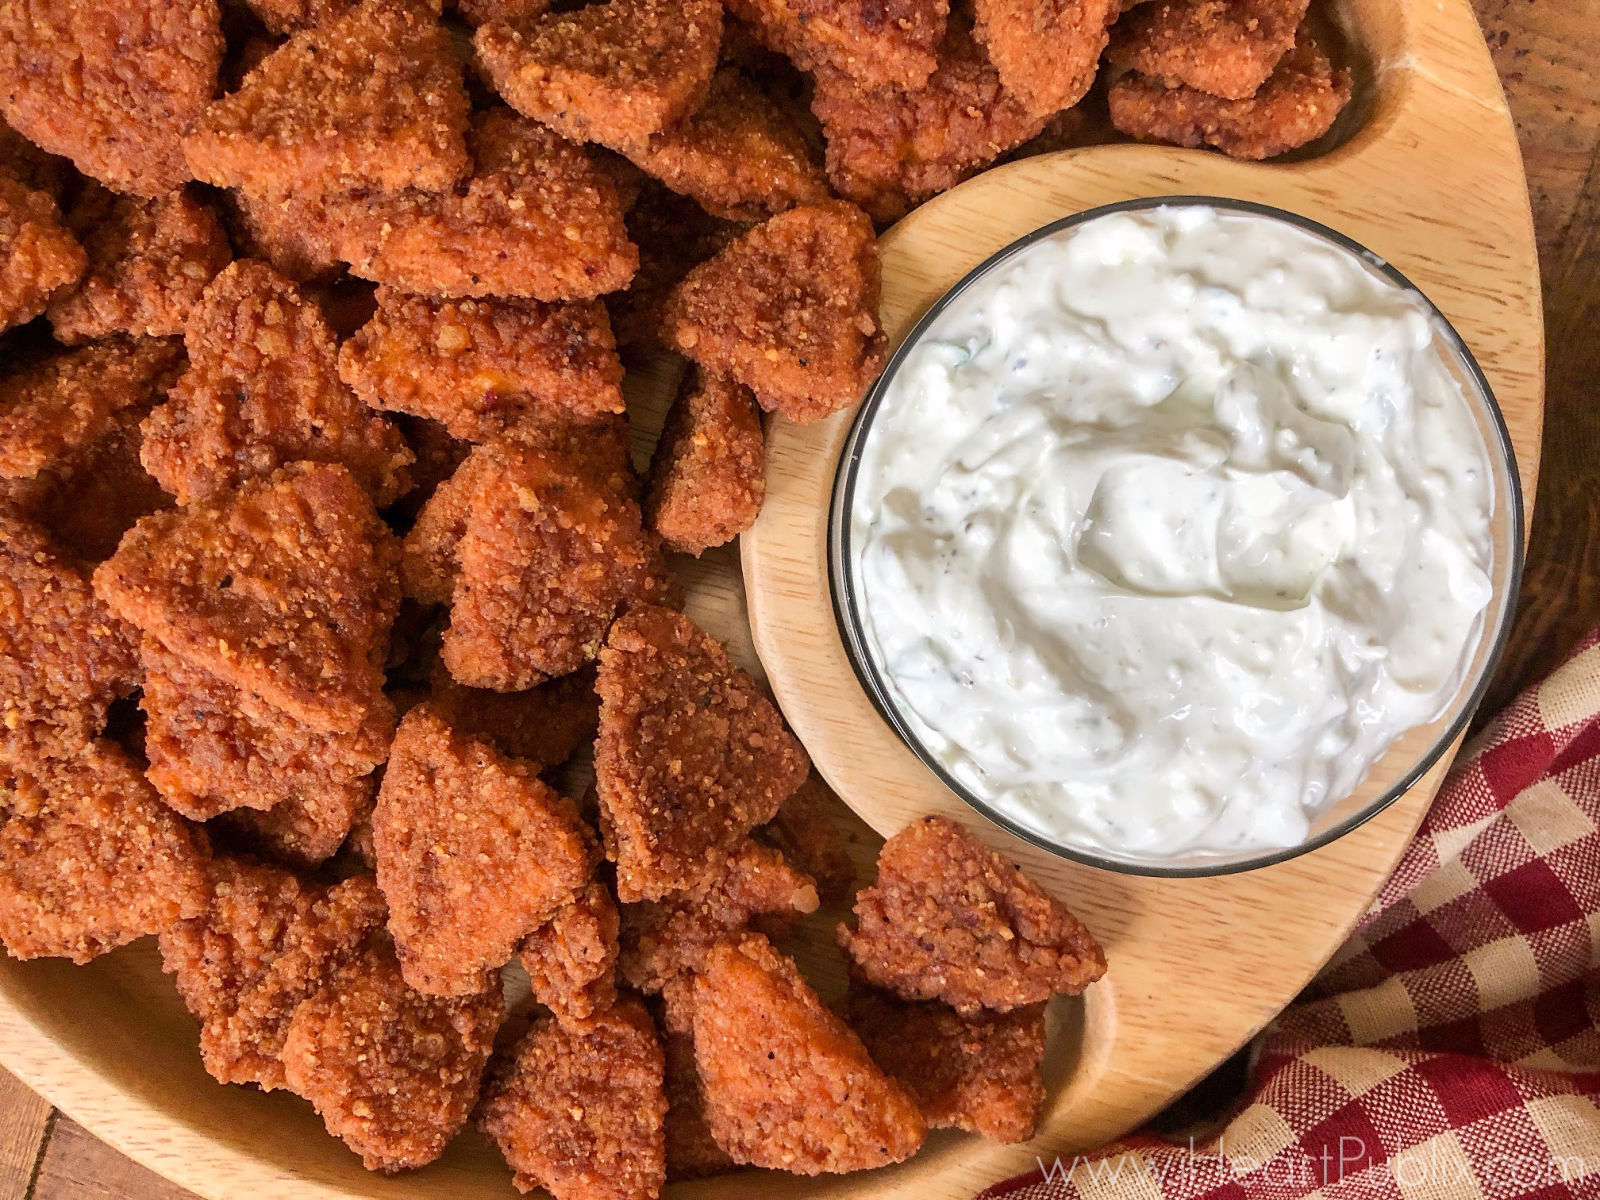 Enjoy My Easy Blue Cheese Dip With Tyson Any’tizers Chicken Chips – Save Now At Publix